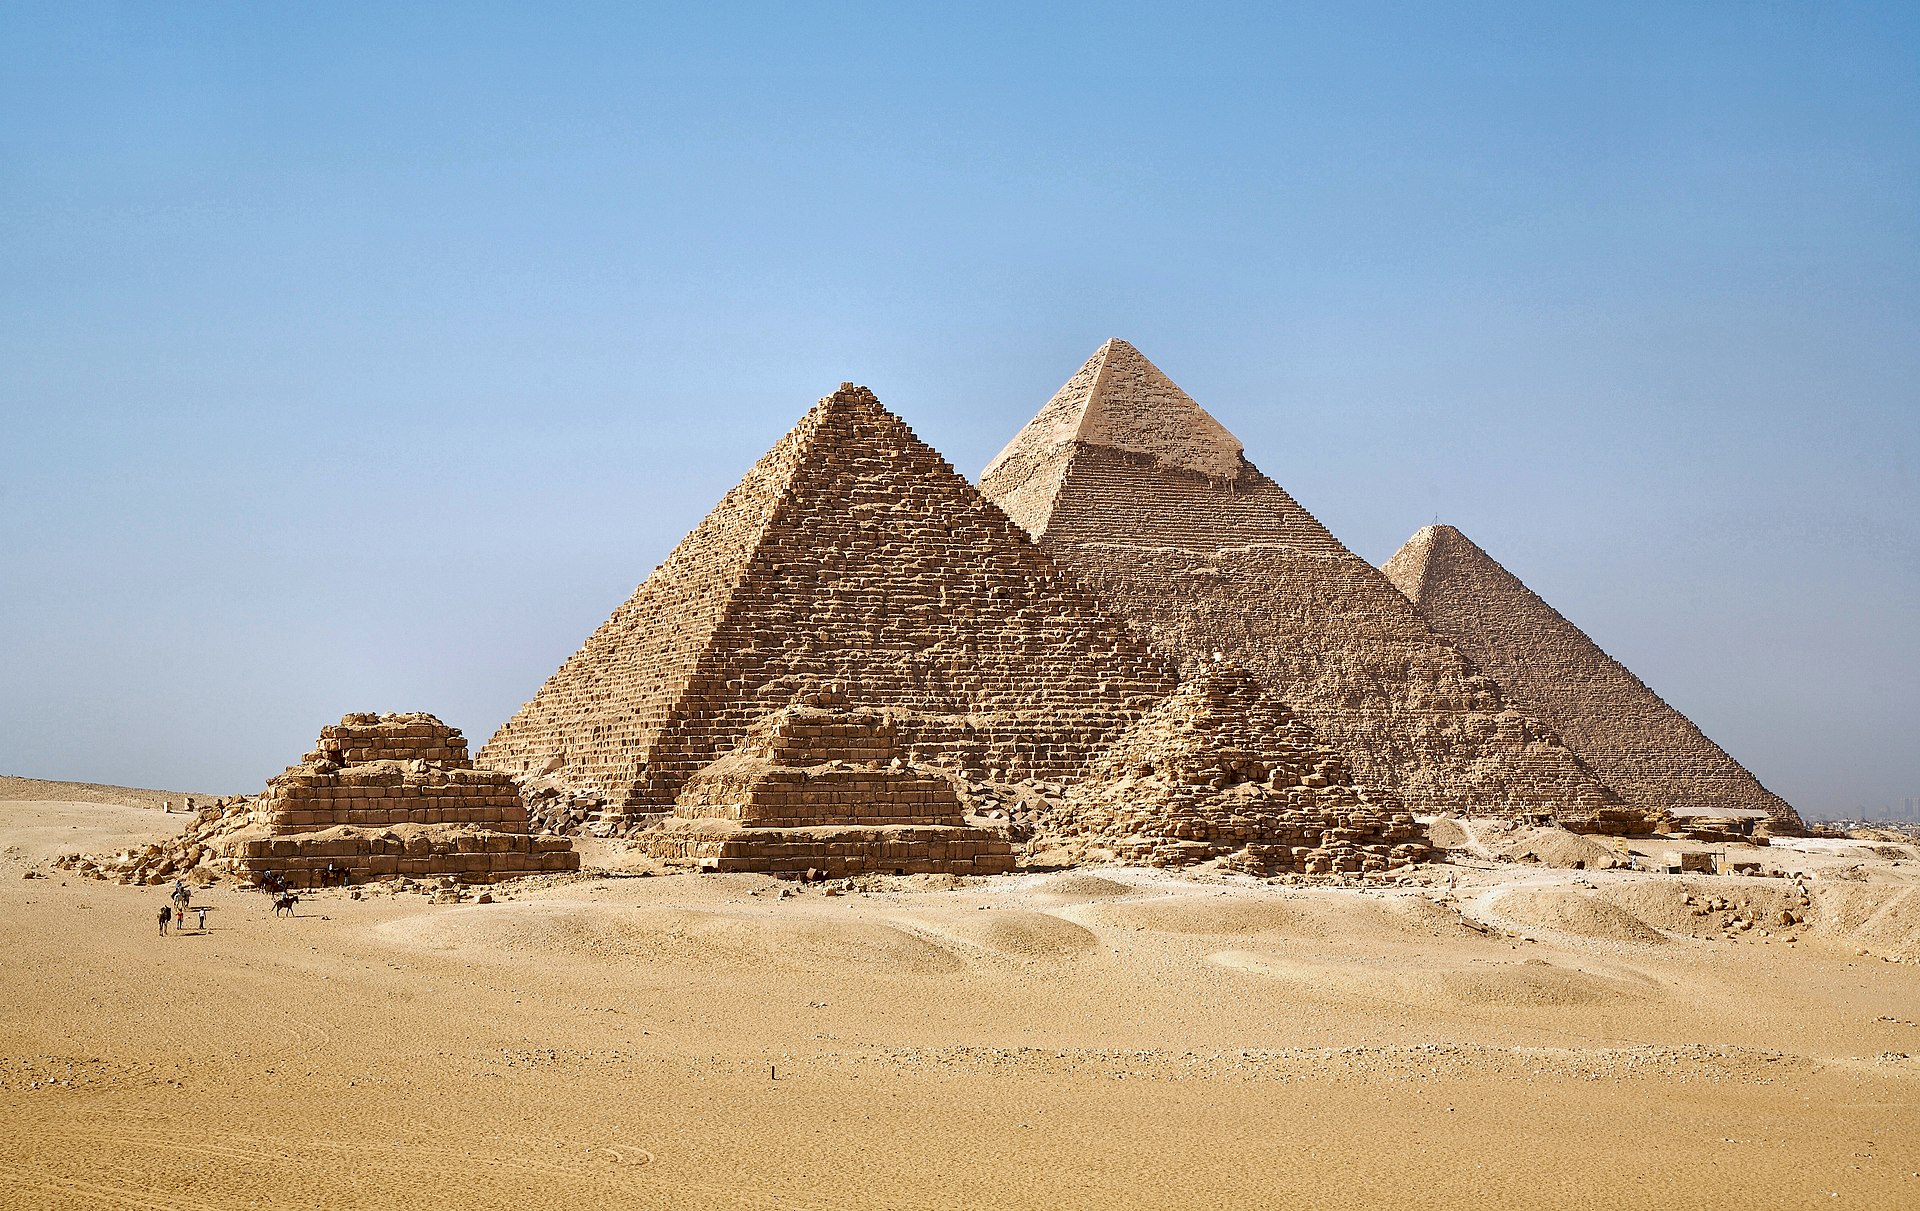 An example of Architecture from Wikipedia, The Pyramids at Gizah - © CC BY-SA 2.0